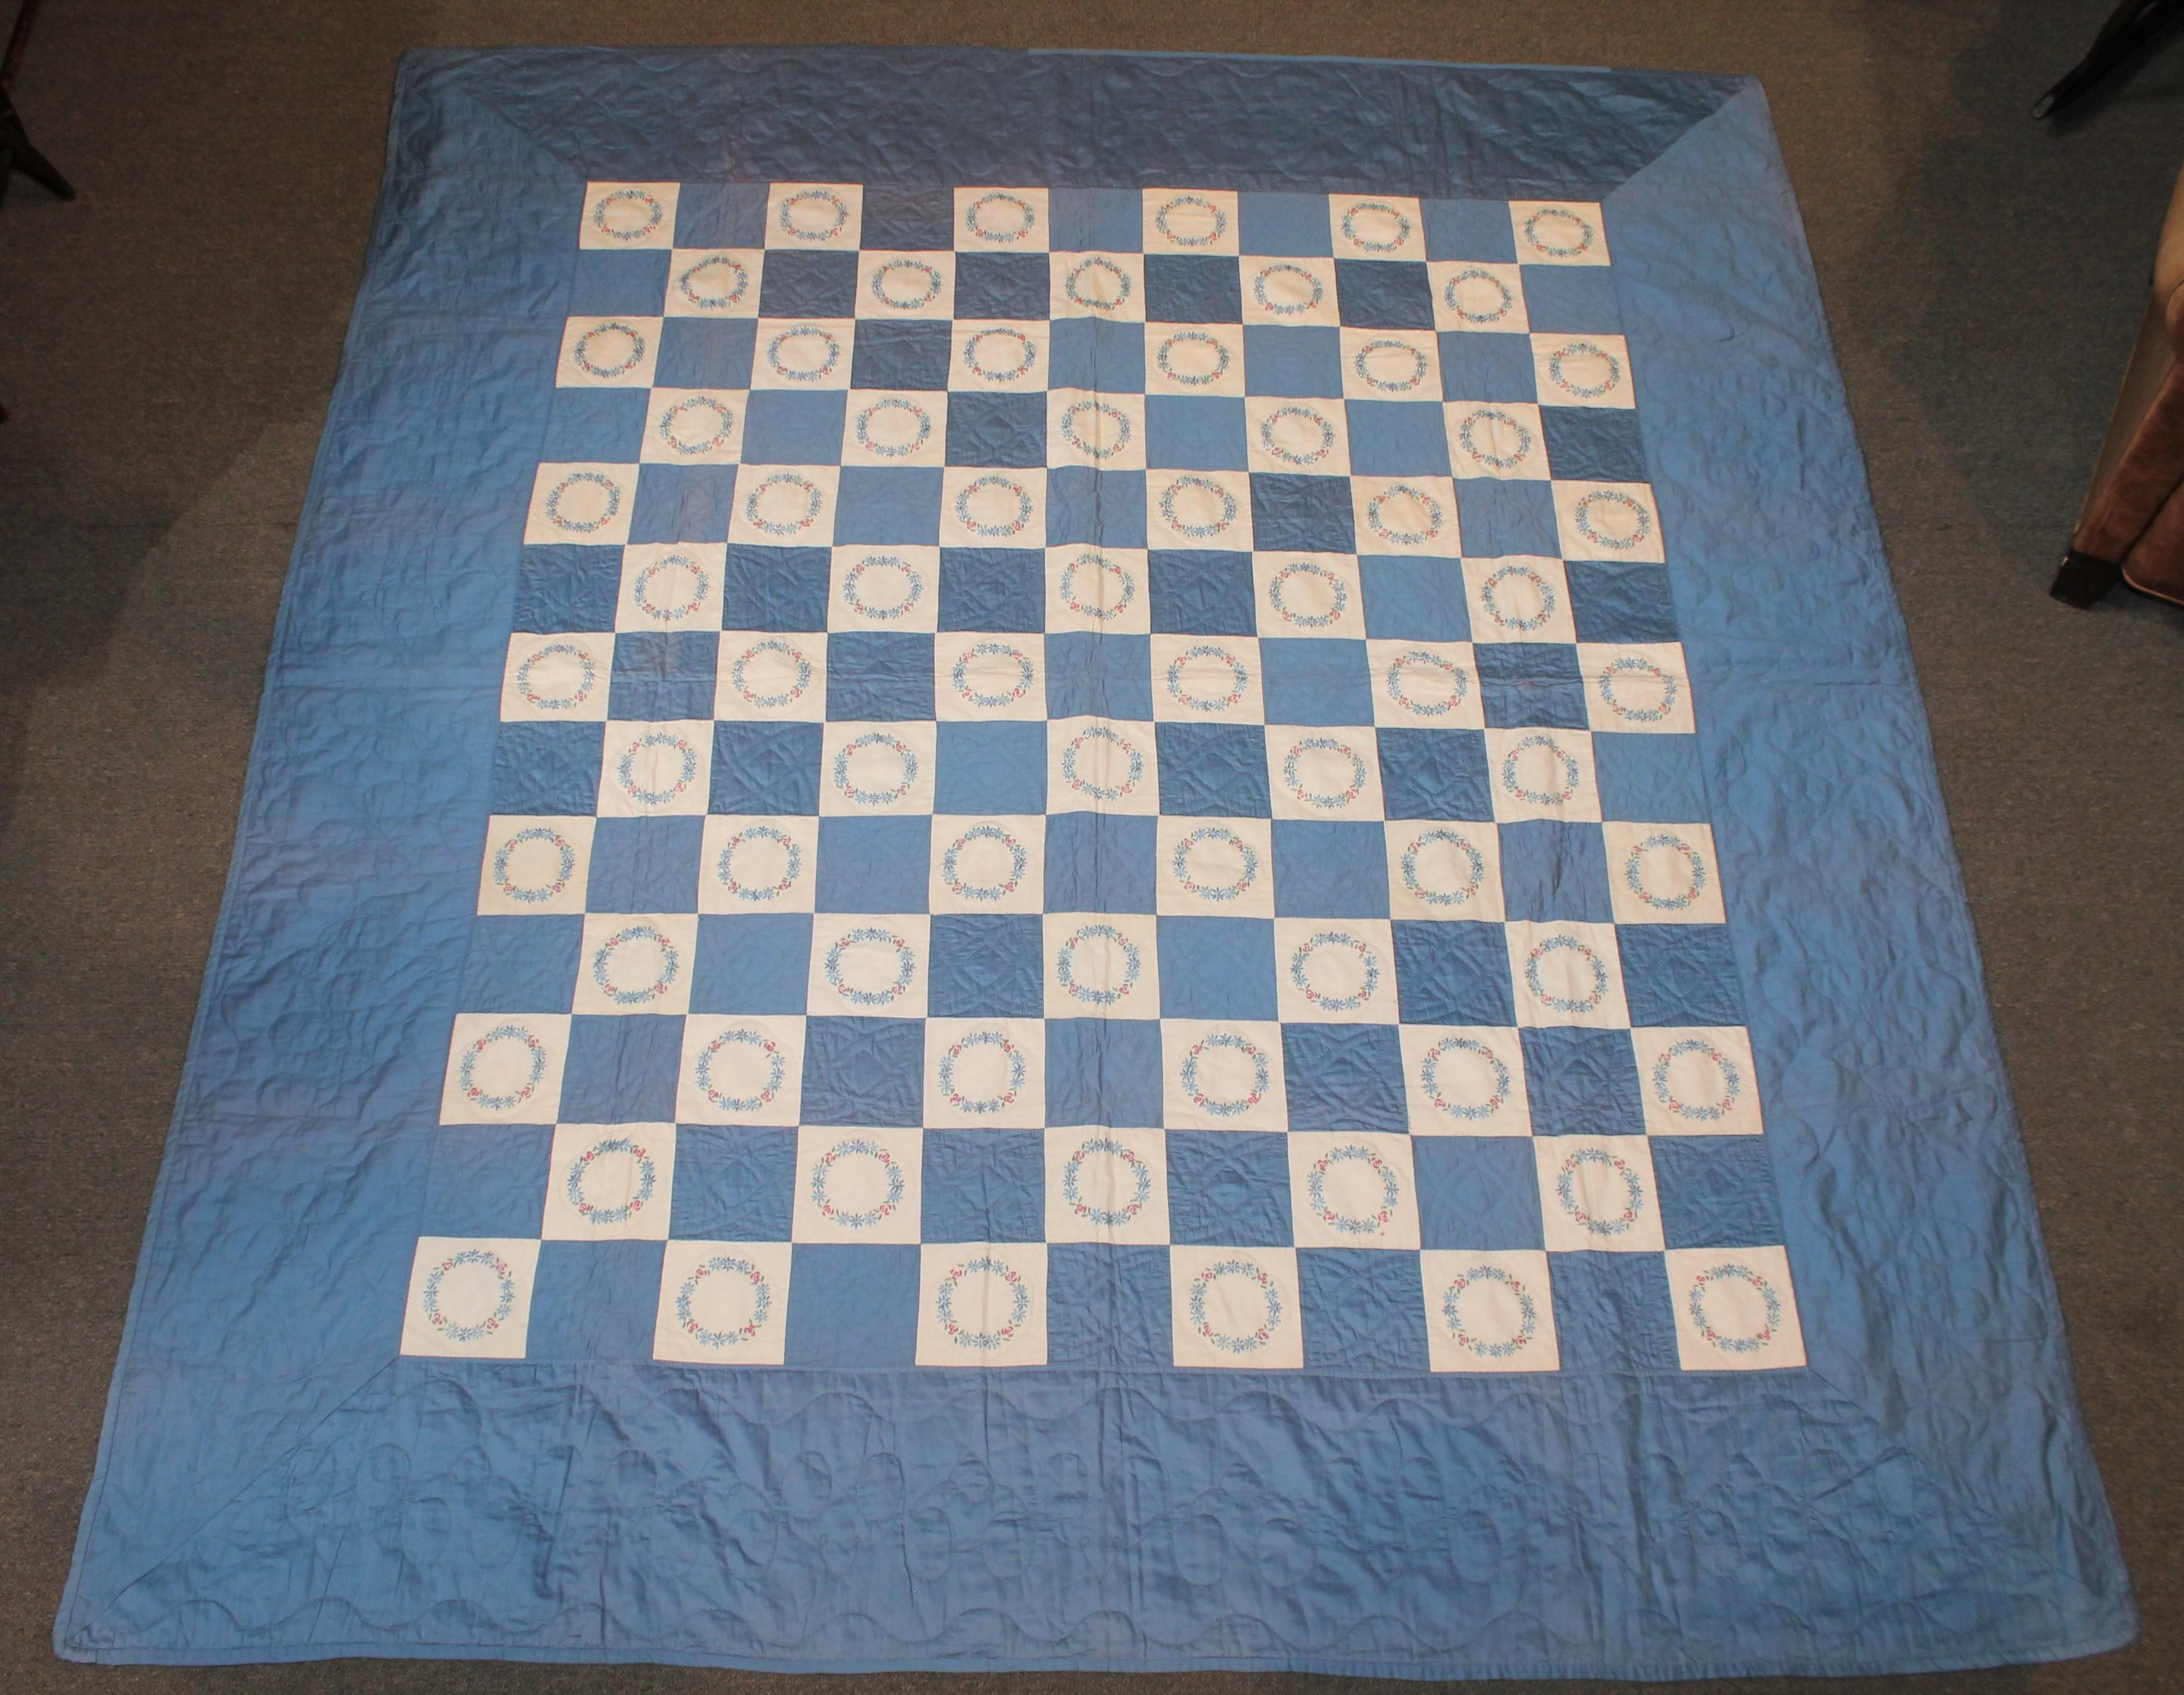 This finely quilted blue and white sateen quilt is in fine condition. Minor fold fade in areas.